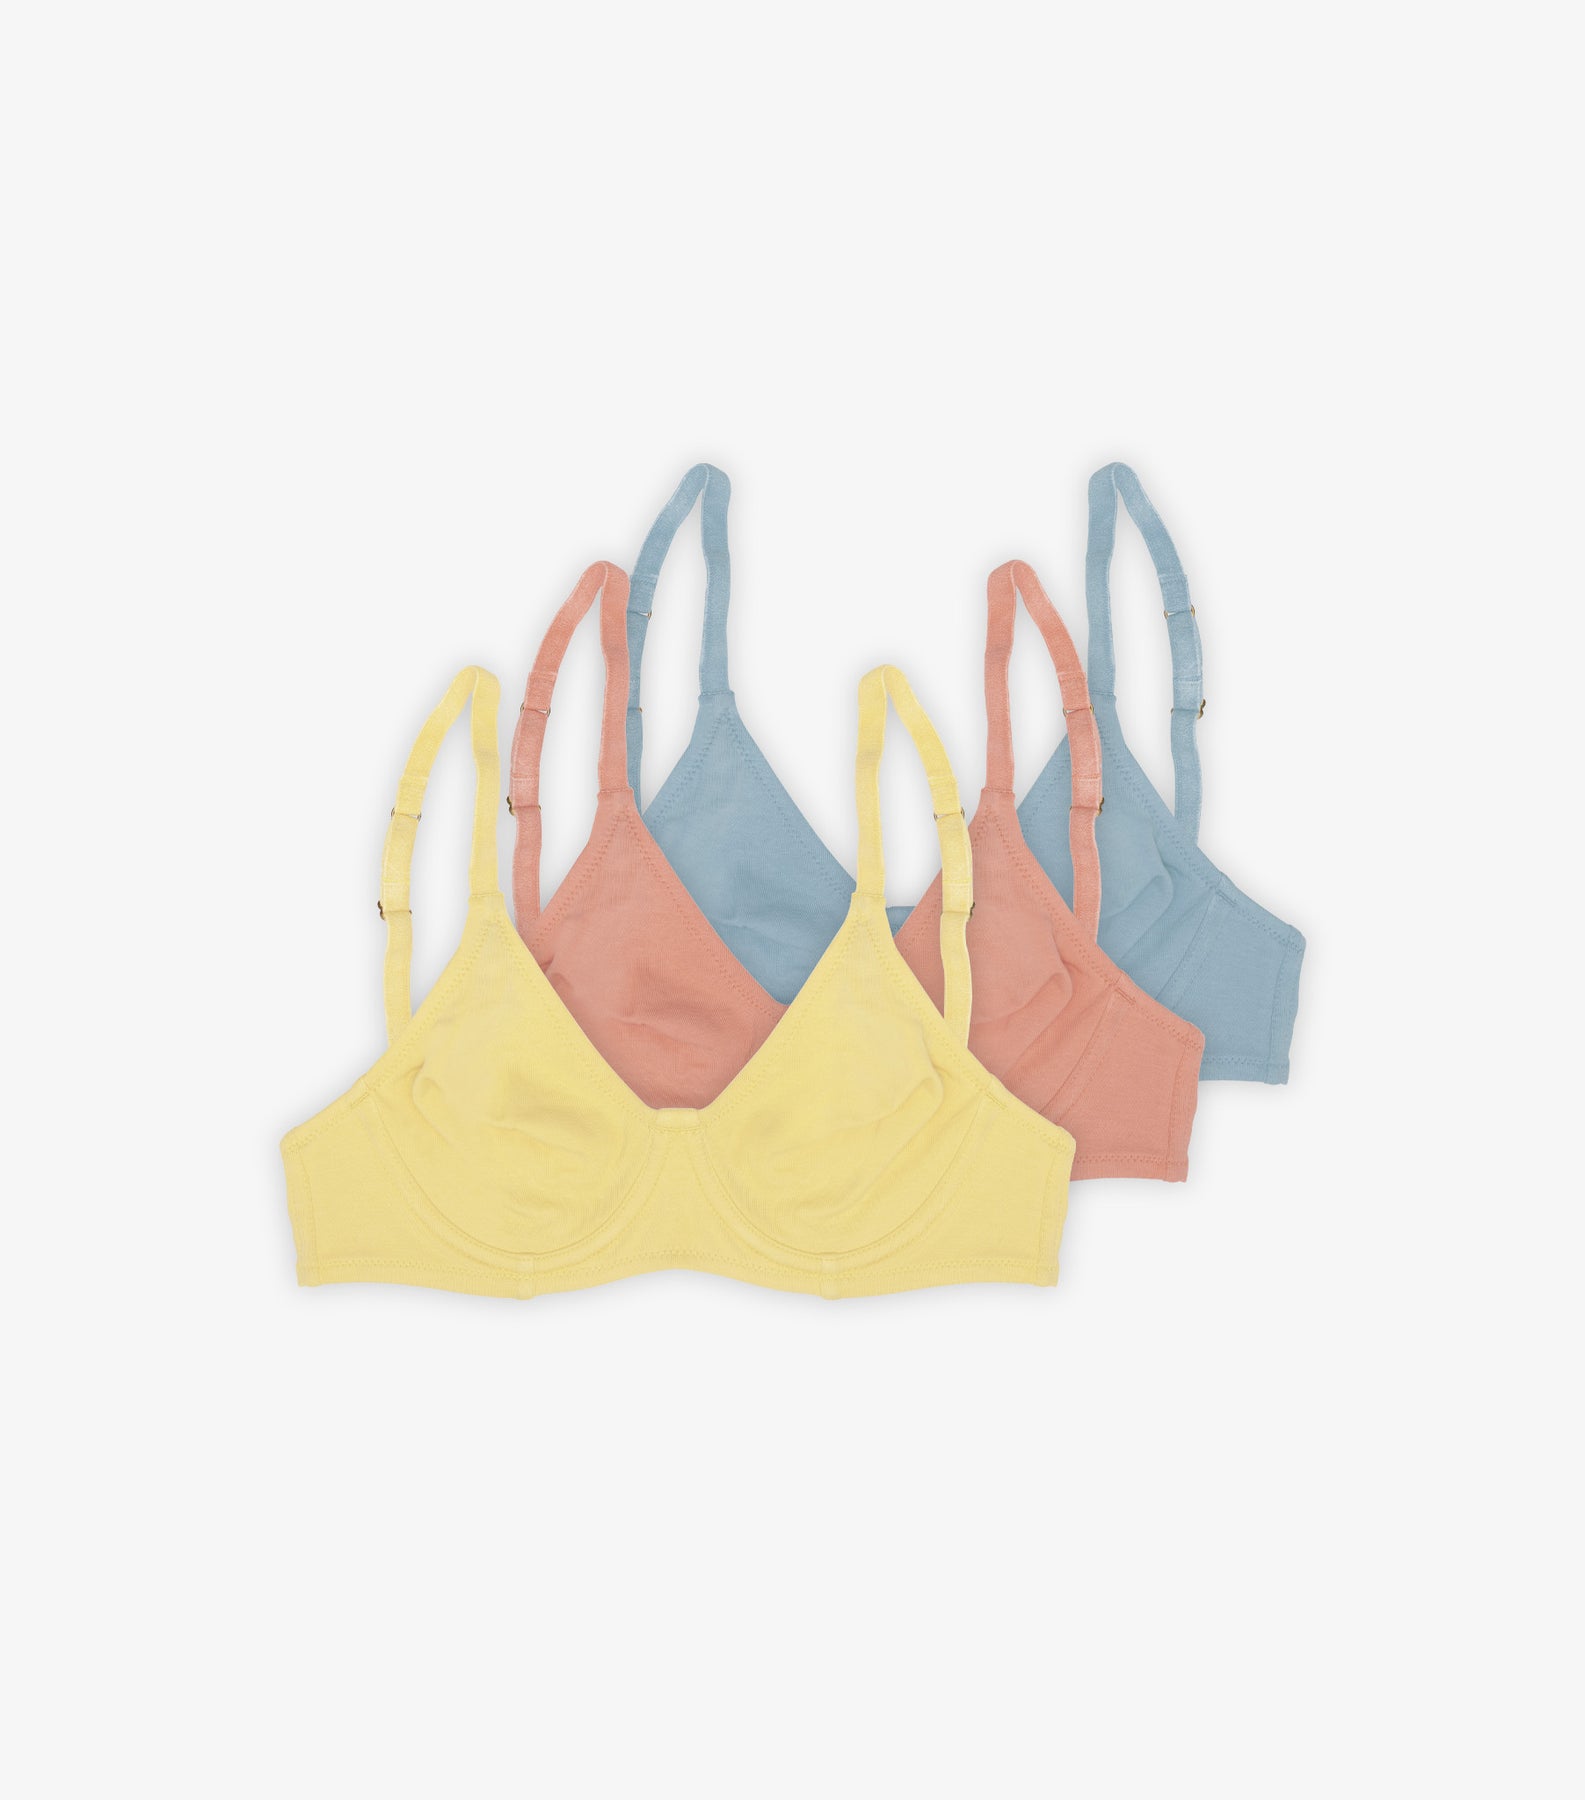 NICO Women's Orange Soft Cup Bras - Plant Dyed Organic Cotton Underwire Bra  - Size One Size, 14C at The Iconic - ShopStyle